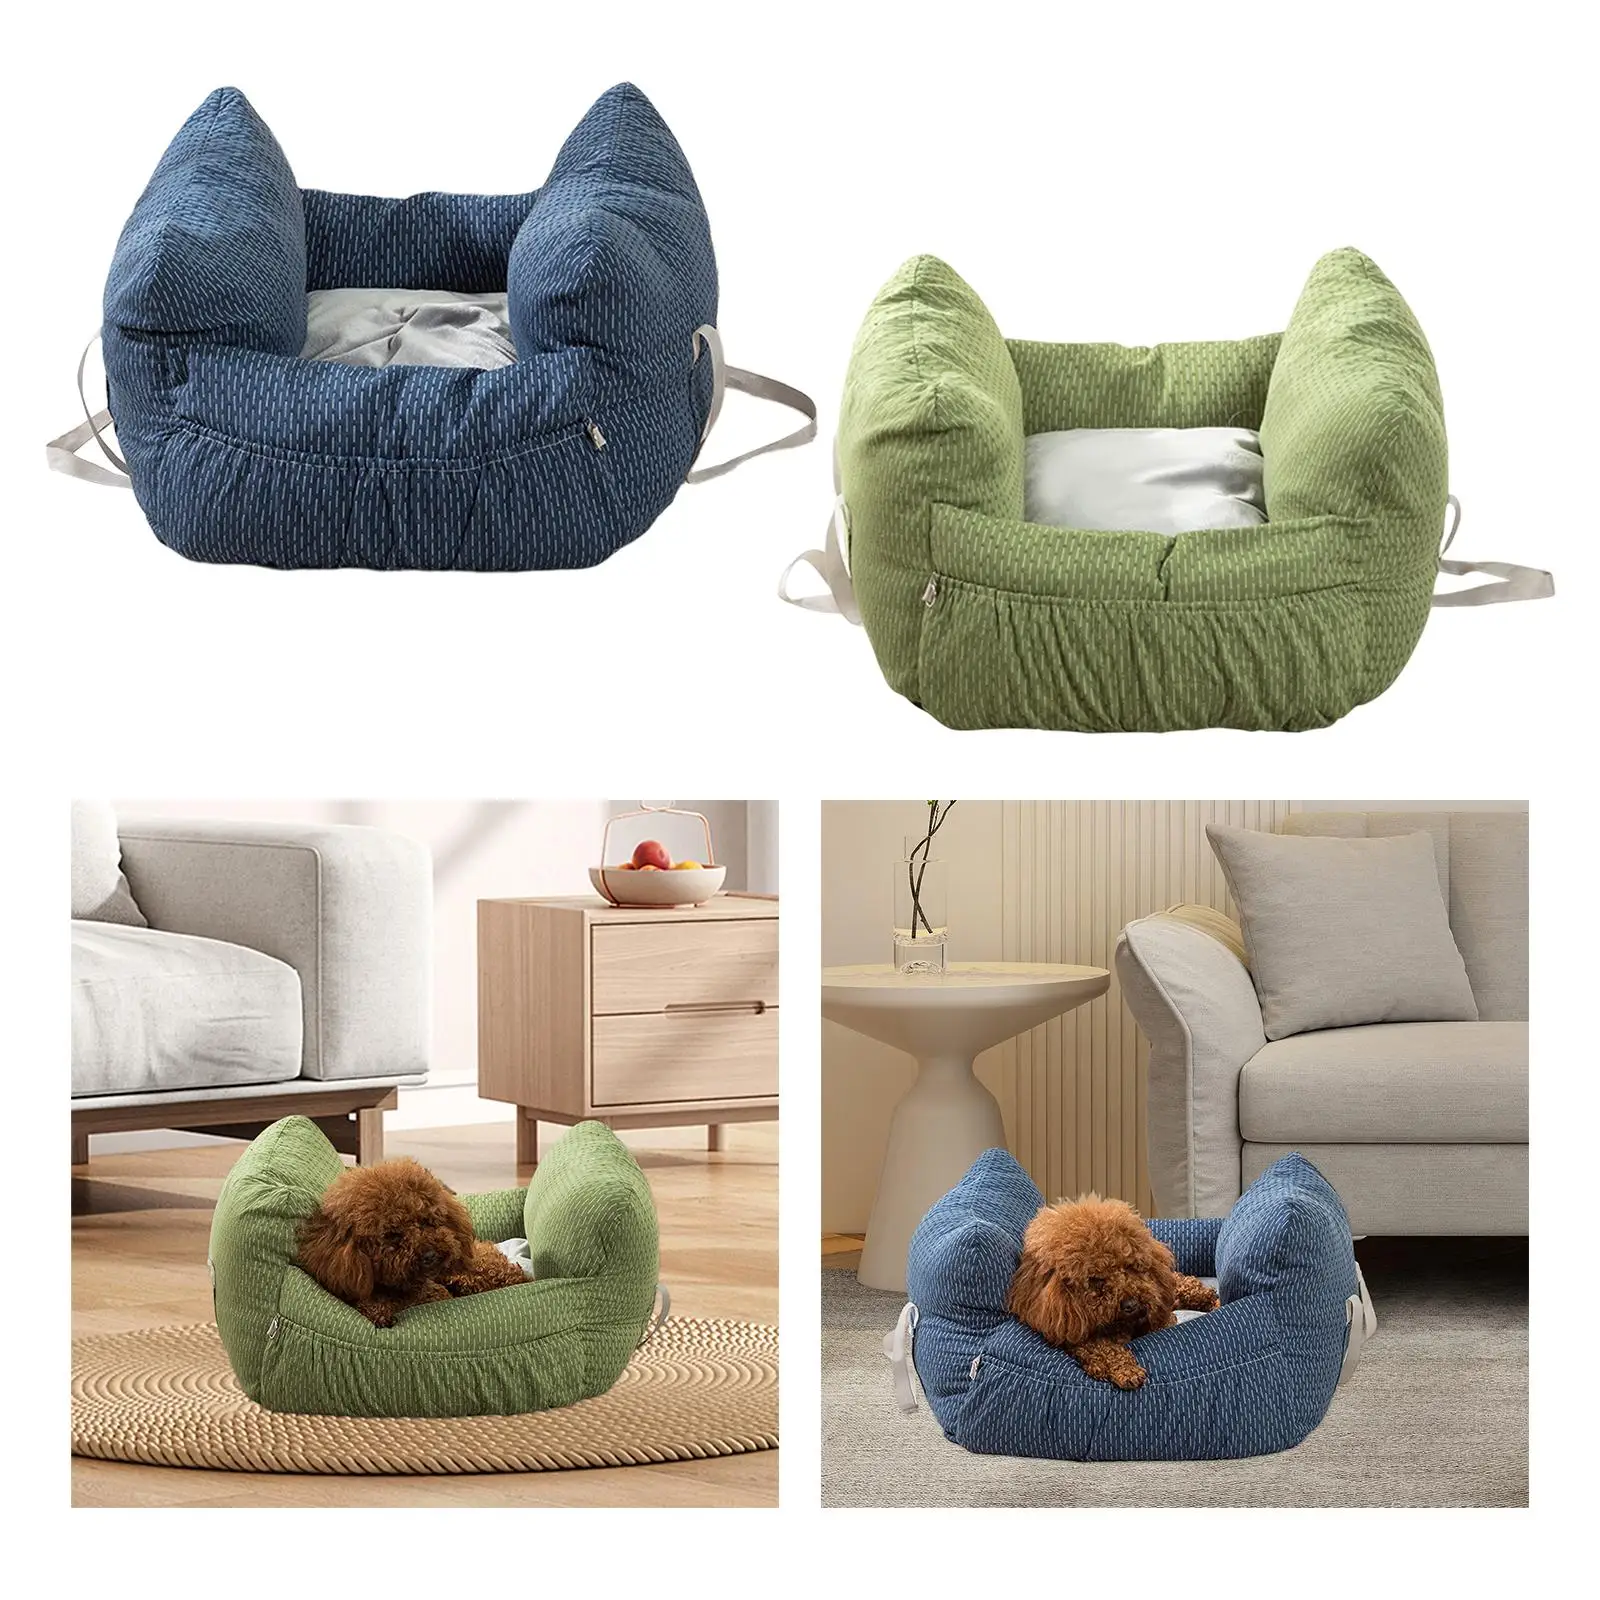 Dog Car Seat Bed Nest Soft Durable Non Slip Wear Resistant Seats